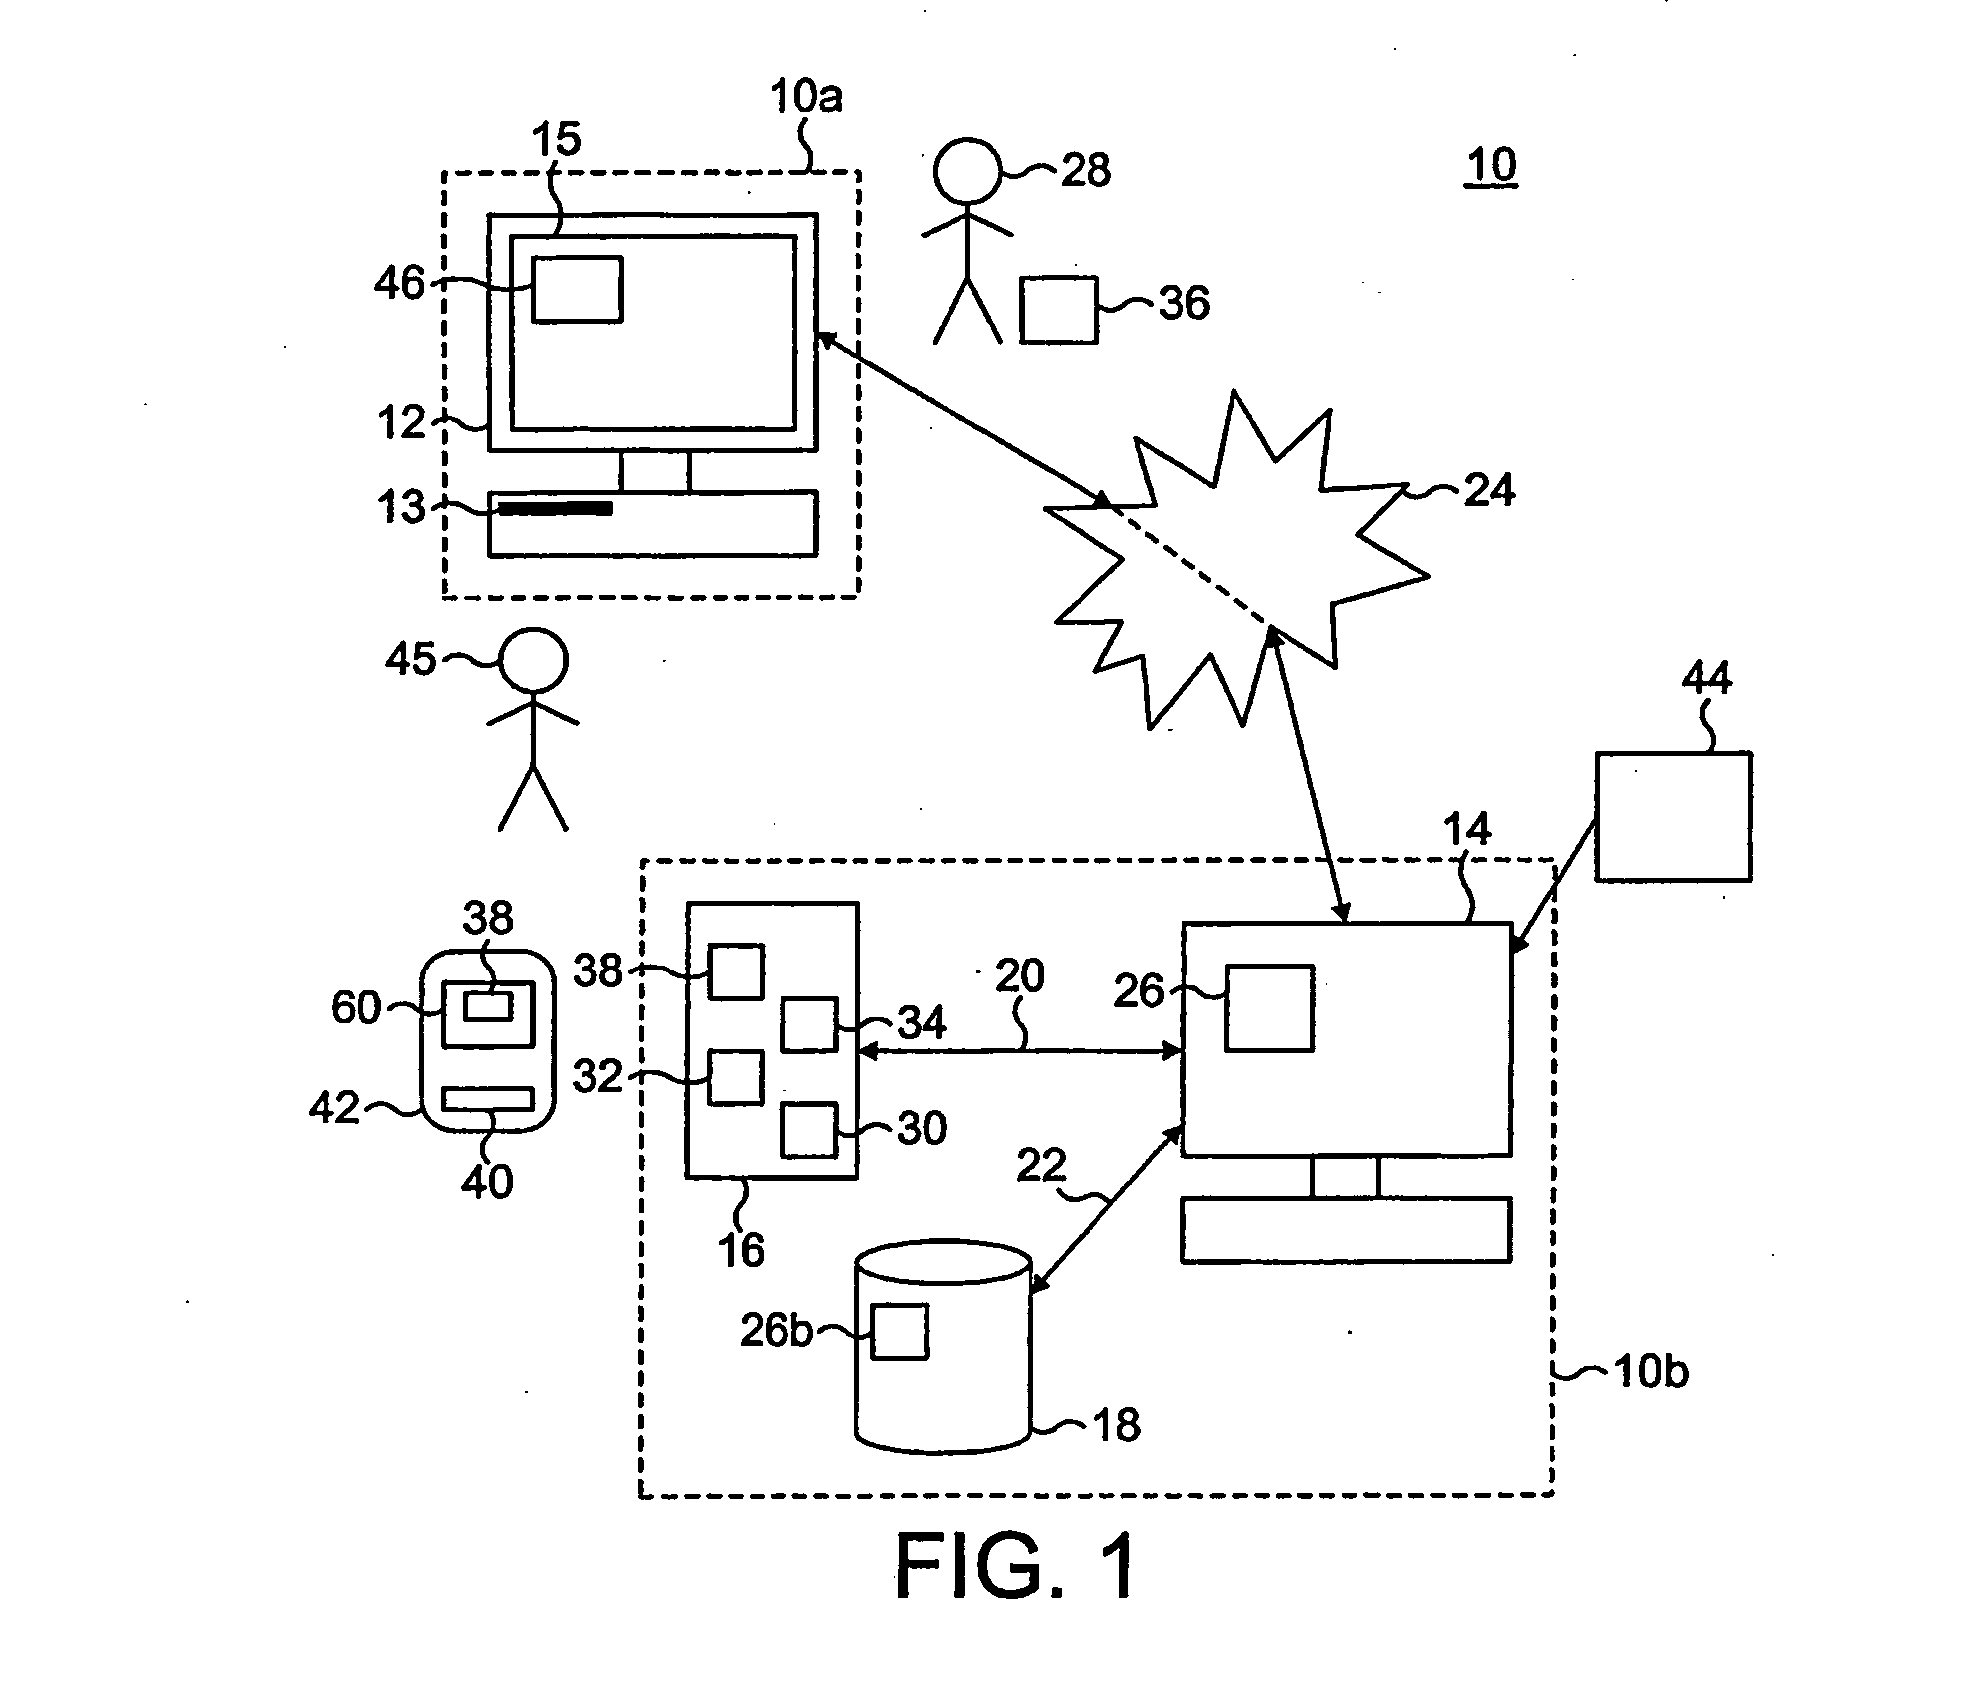 Portable storage device for storing and accessing personal data